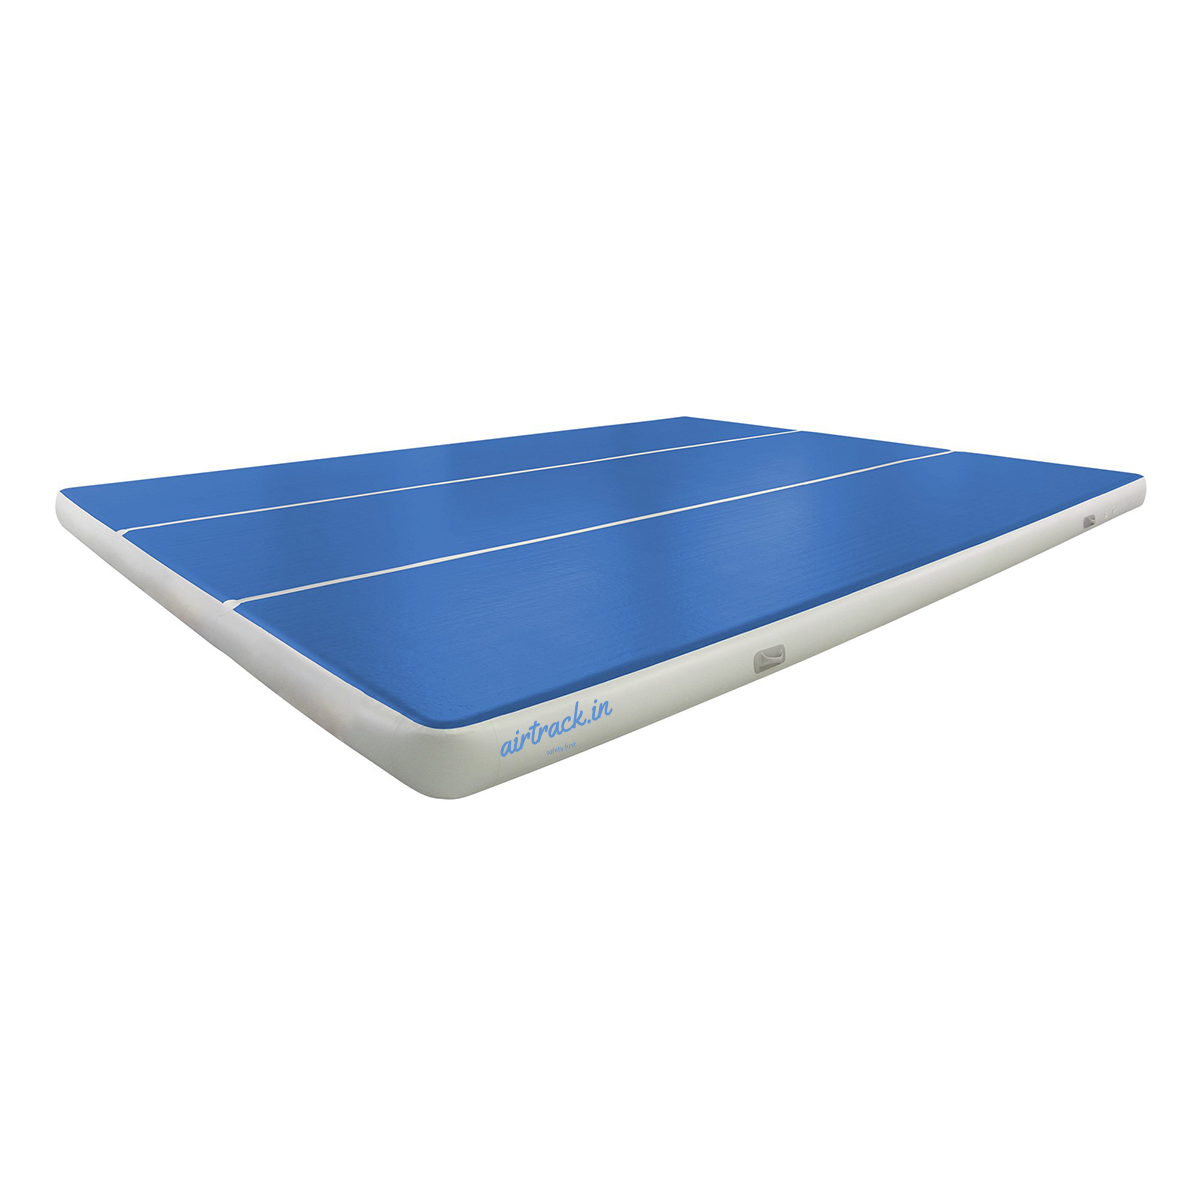 4m x 4m x 0.20m Airtrack Mat | Airtrack India